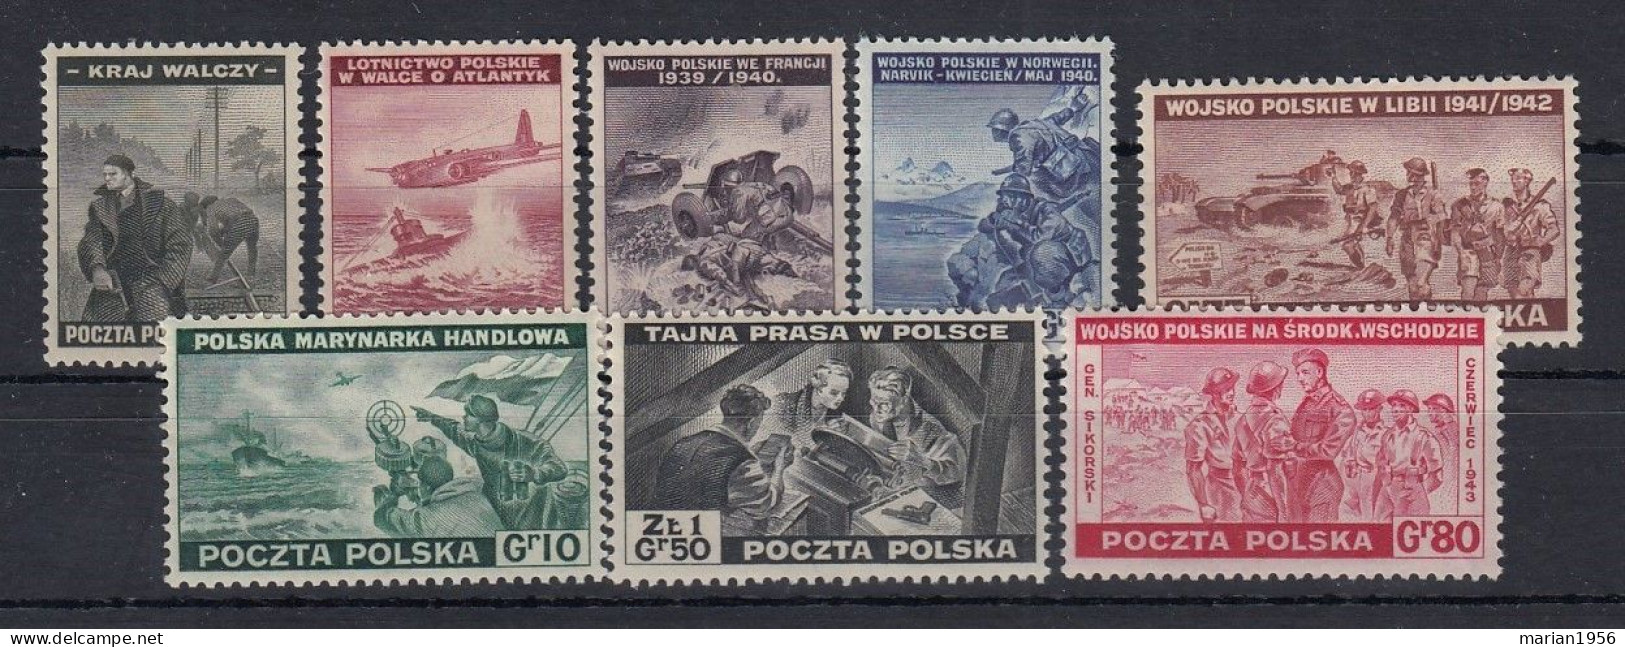 Pologne 1943 - Guerre - WWII - GOVERNMENT In EXILE (LONDON) - ARMEE POLONAISE -Mich. 368/75 - MNH - Londoner Regierung (Exil)